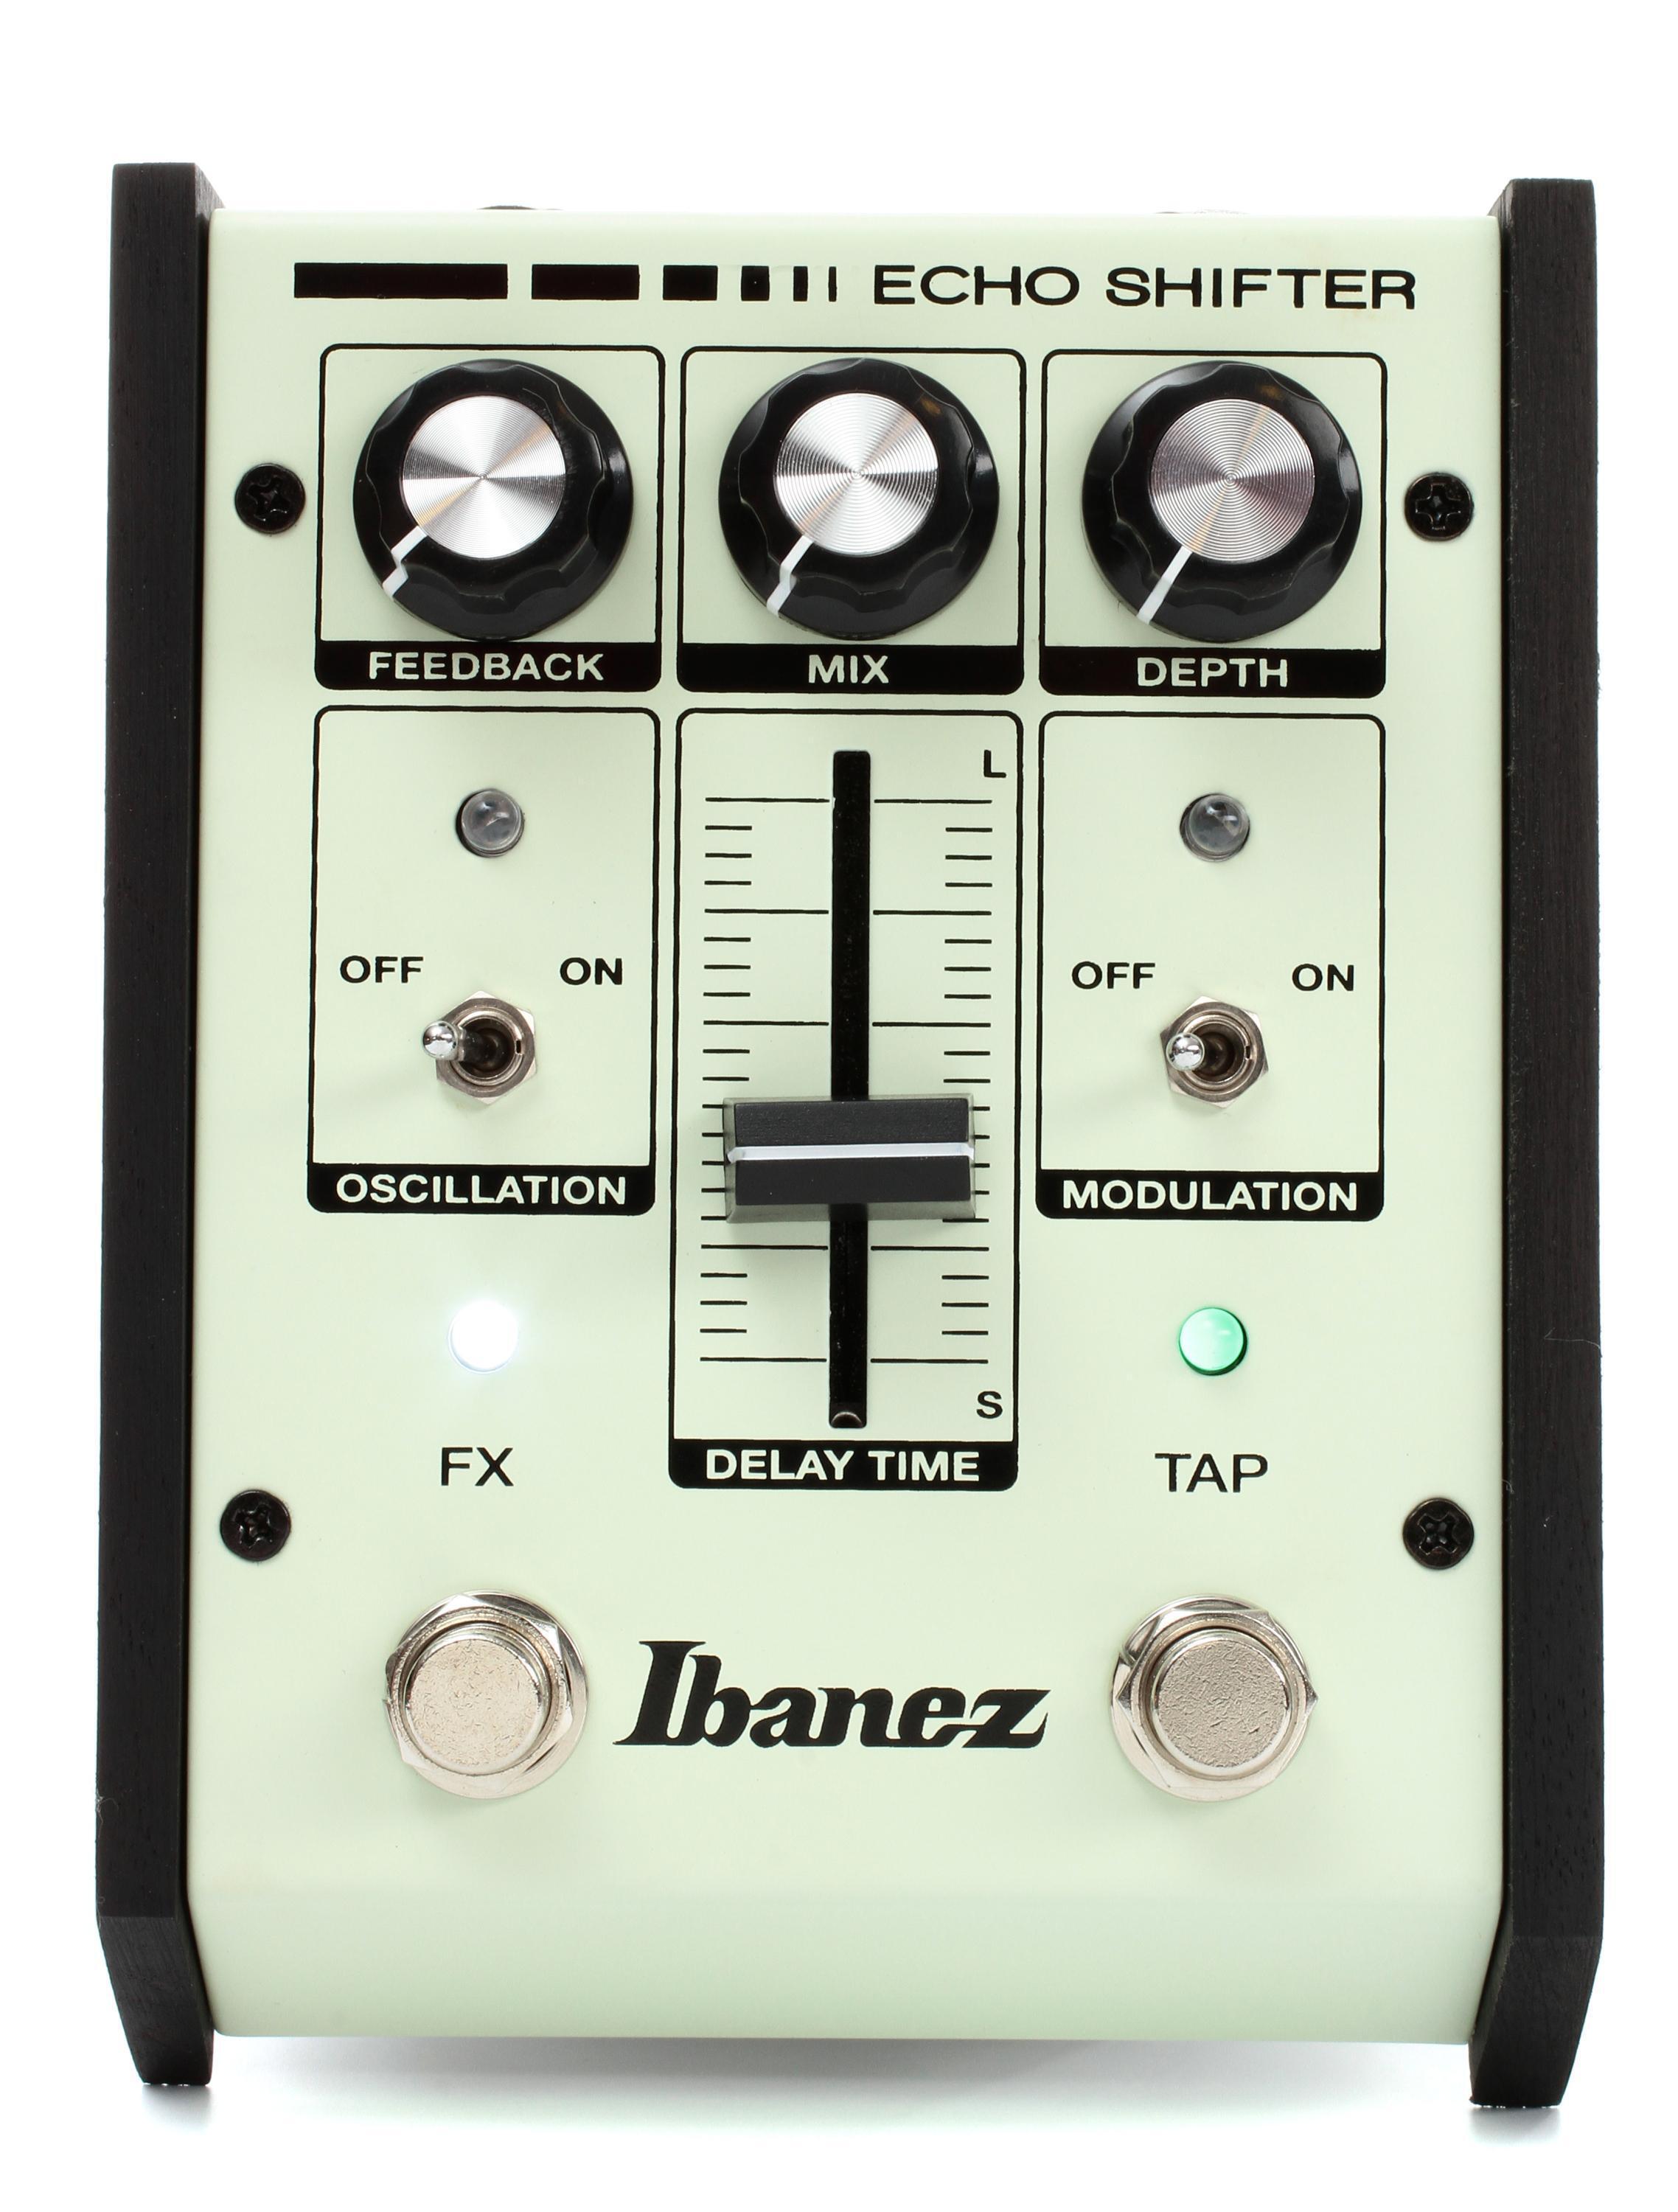 Ibanez ES2 Echo Shifter Analog Delay Pedal Reviews | Sweetwater